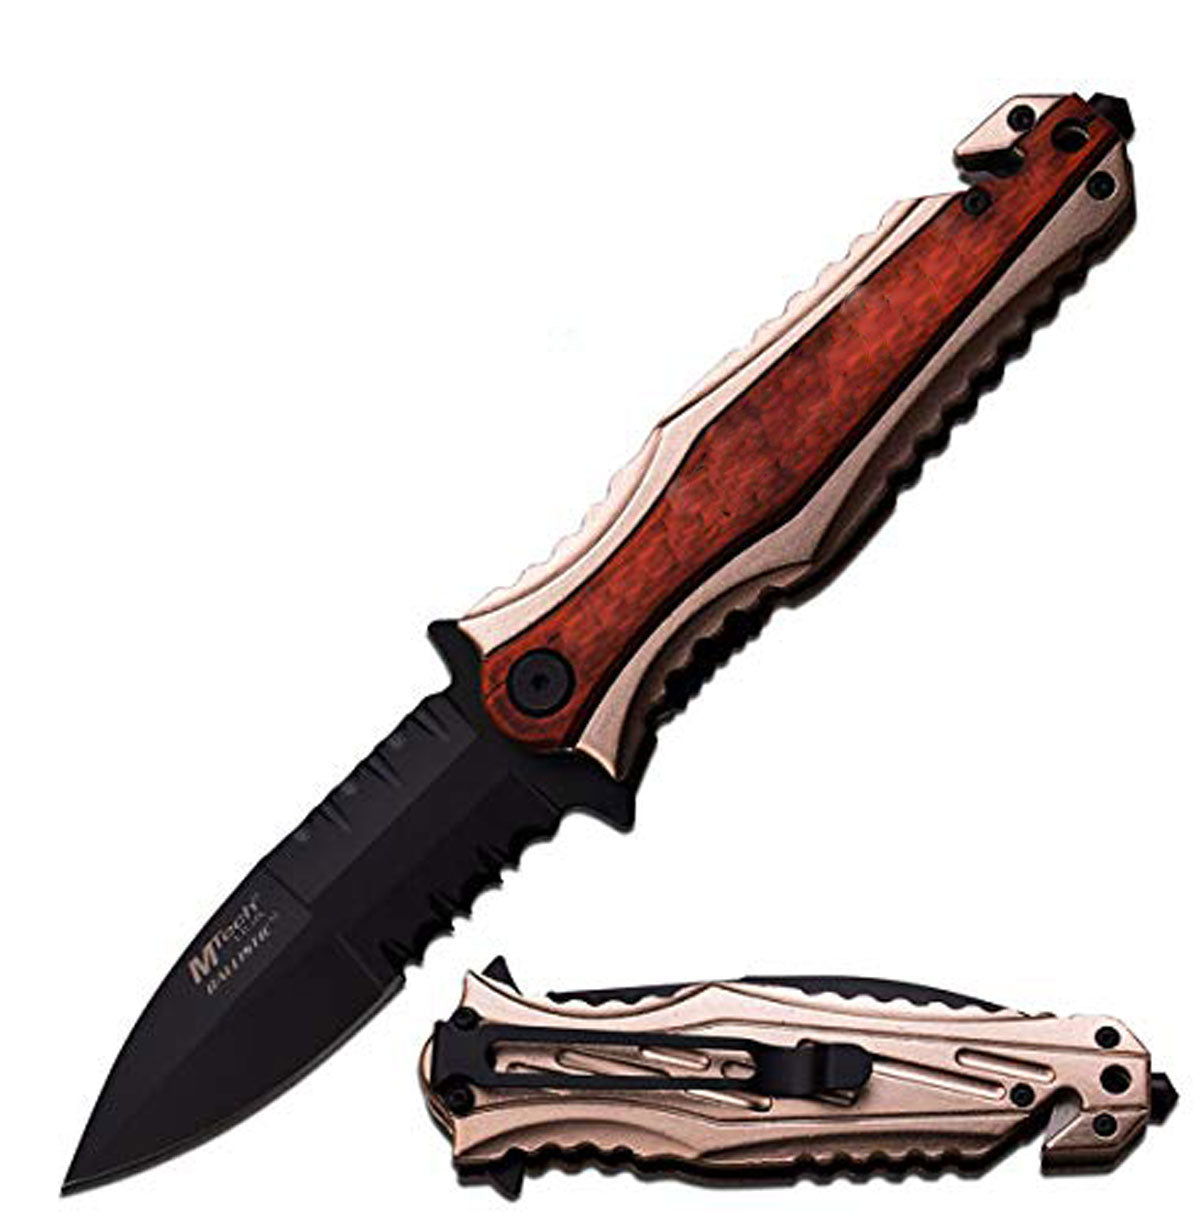 GIFTS INFINITY Personalized Laser Engraved 4.5" Closed Pocket Knife with Stonewashed Blade, Brown wood Handle